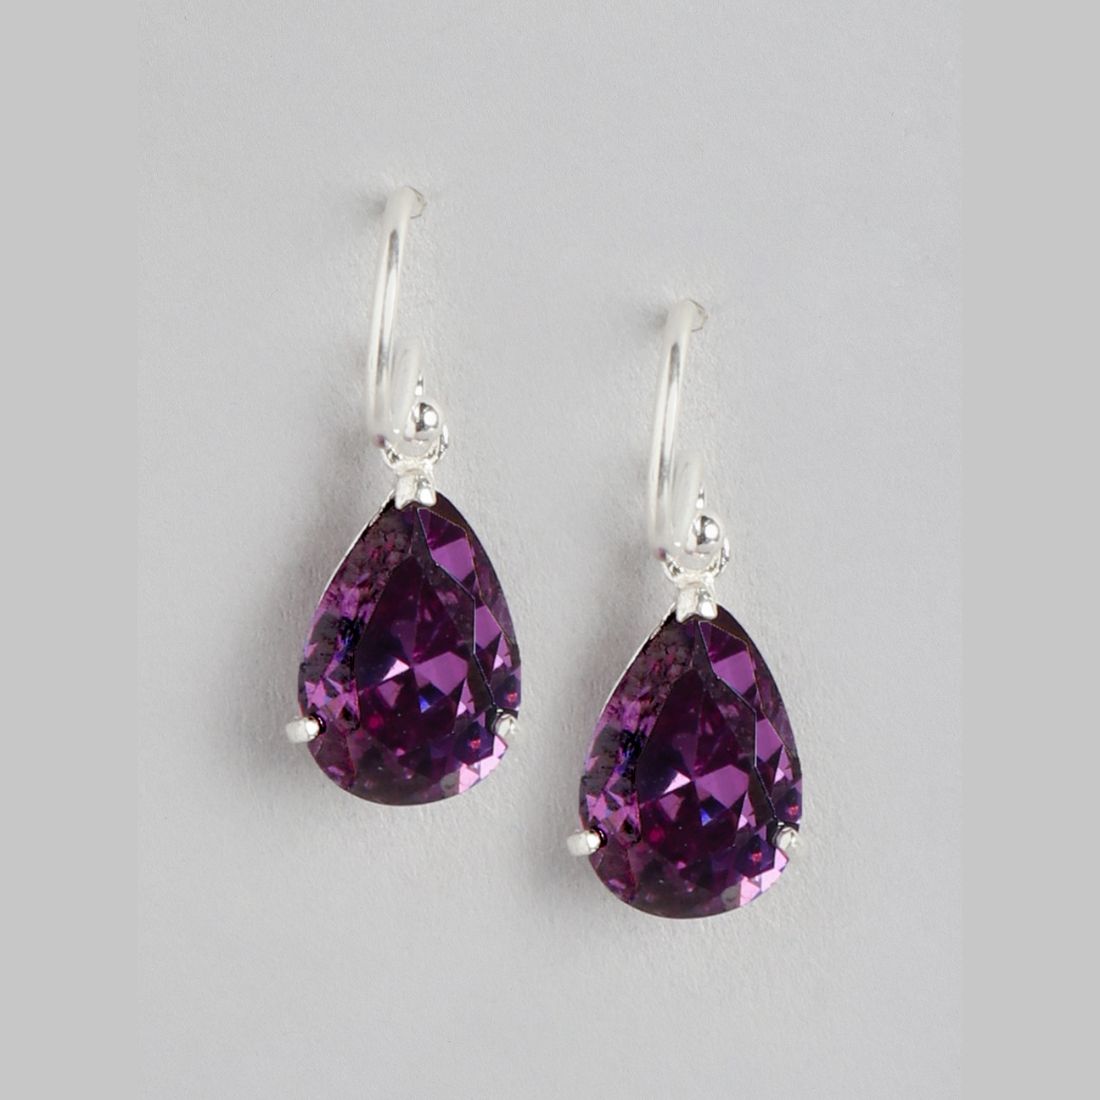 Violet Solitaire Dangling 925 Sterling Silver Earrings